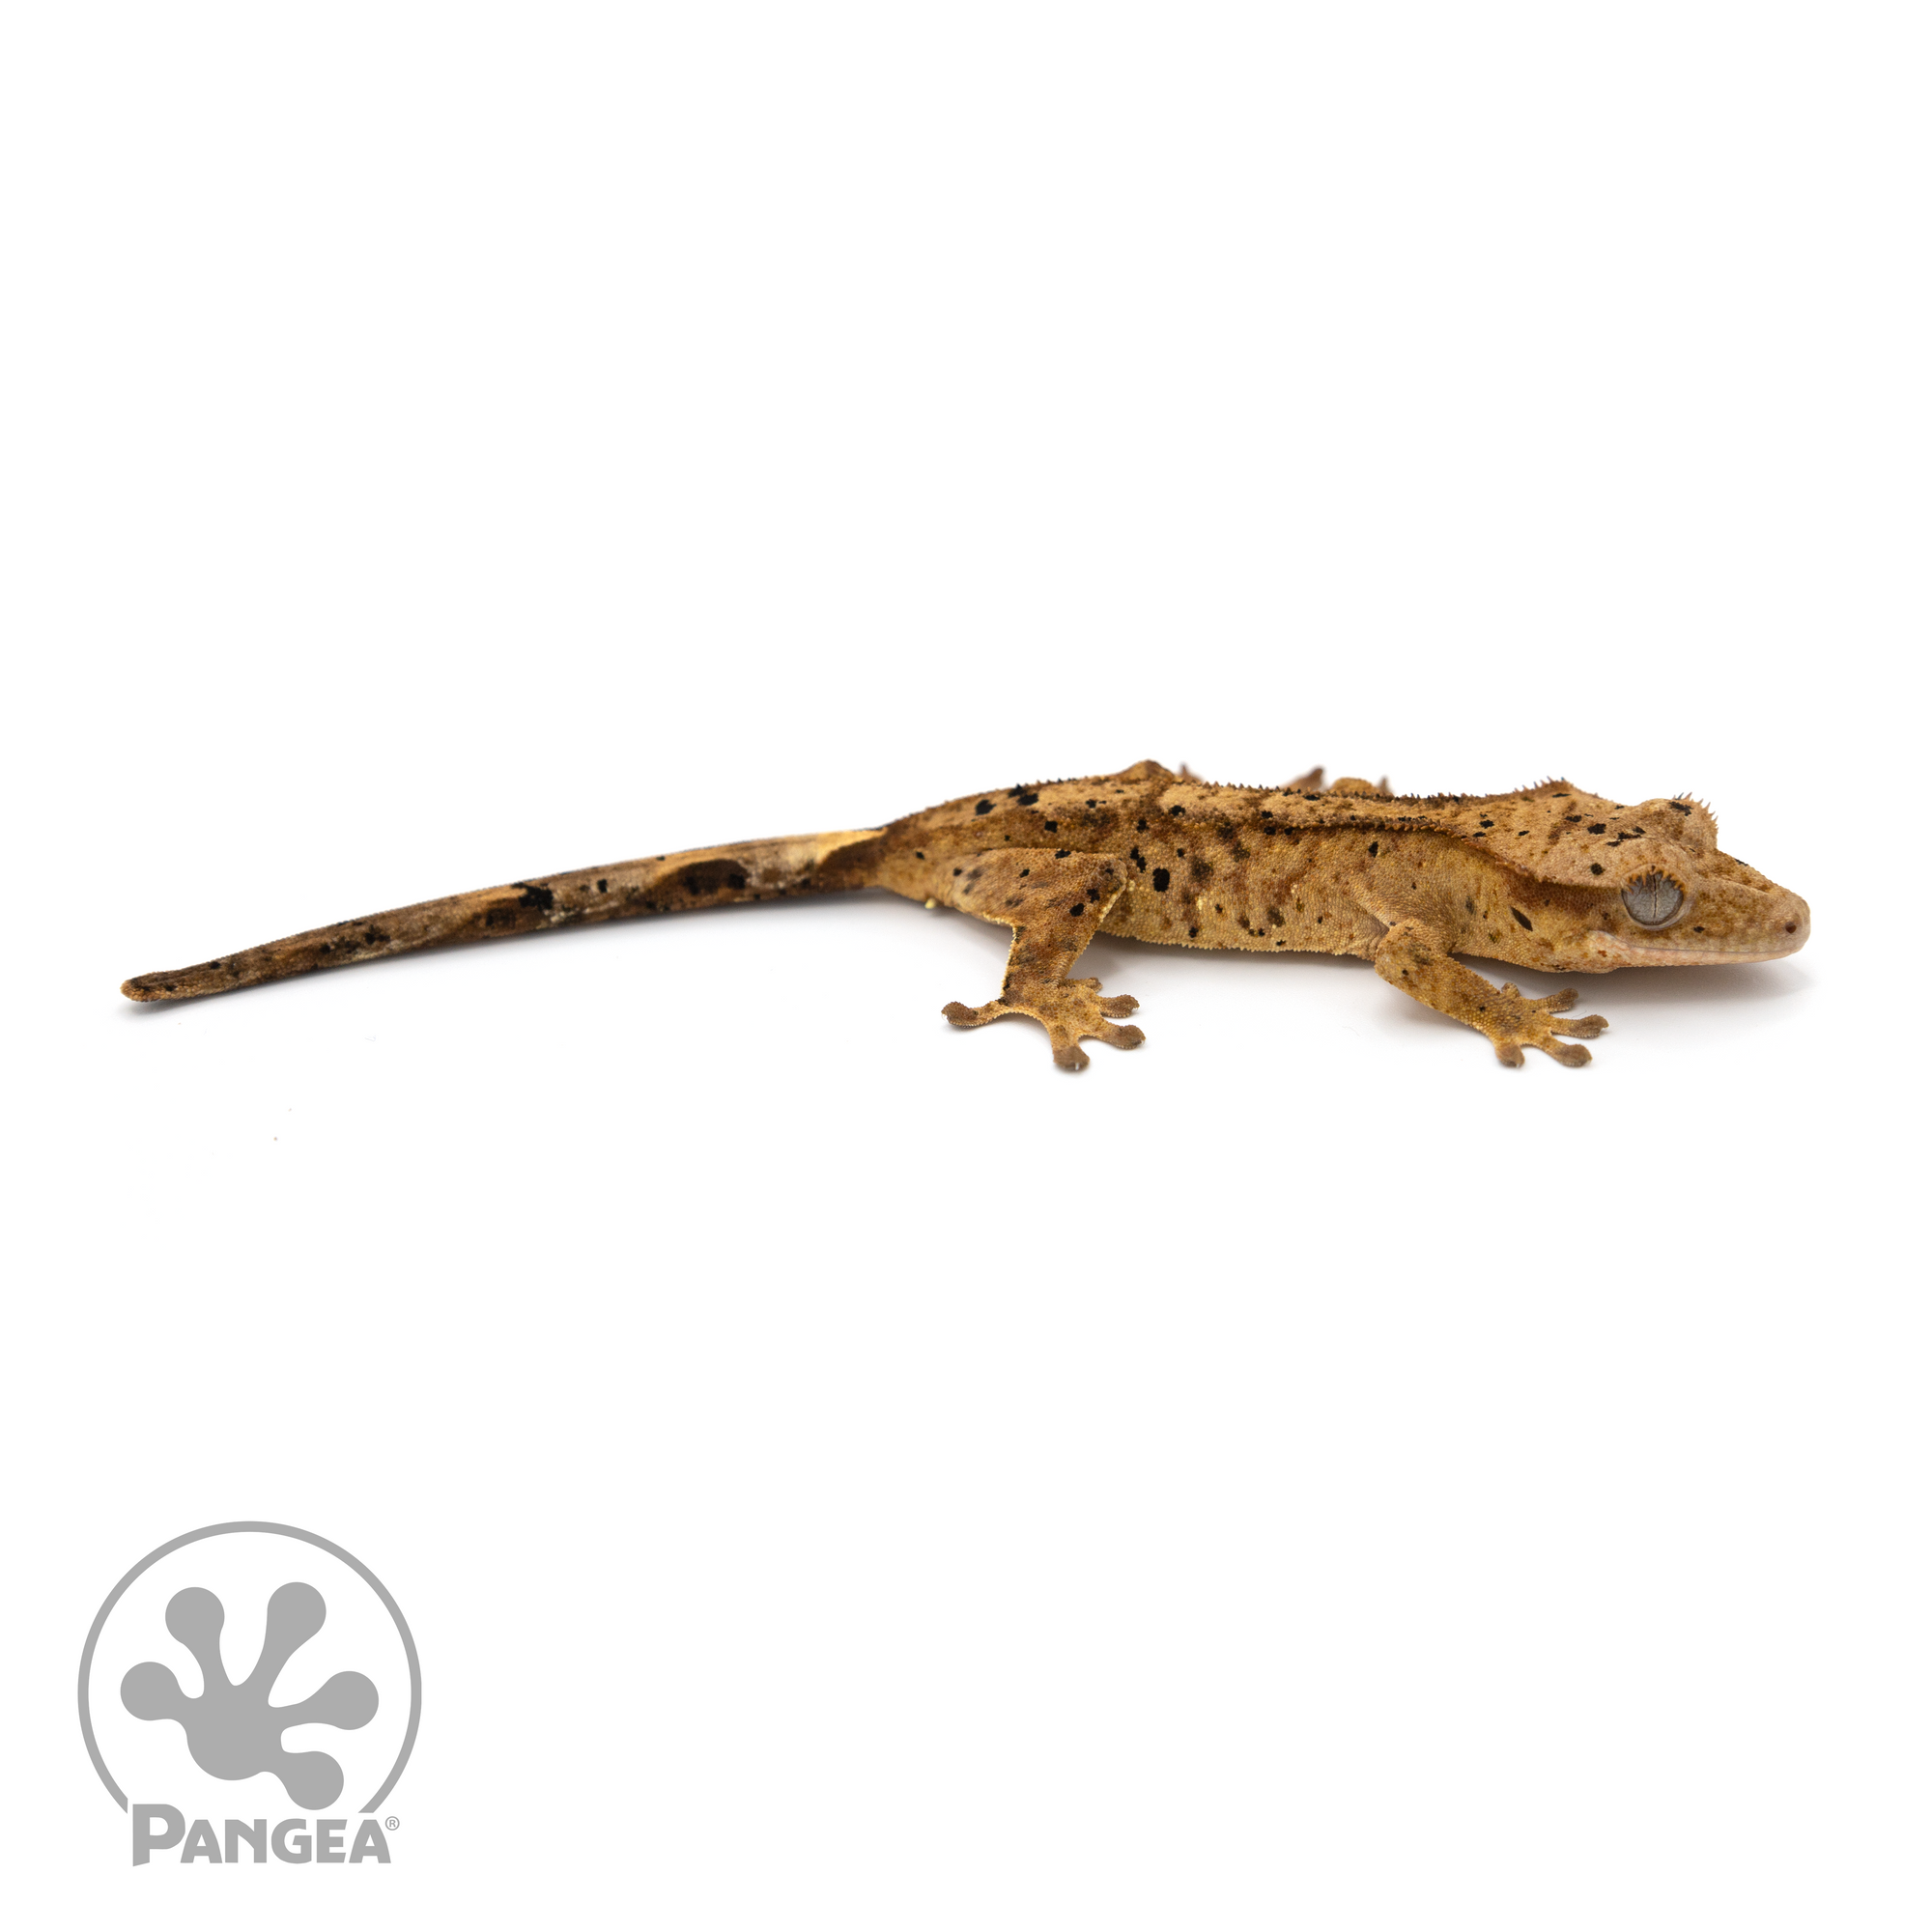 Juvenile Dalmatian Crested Gecko Cr-1241 looking right